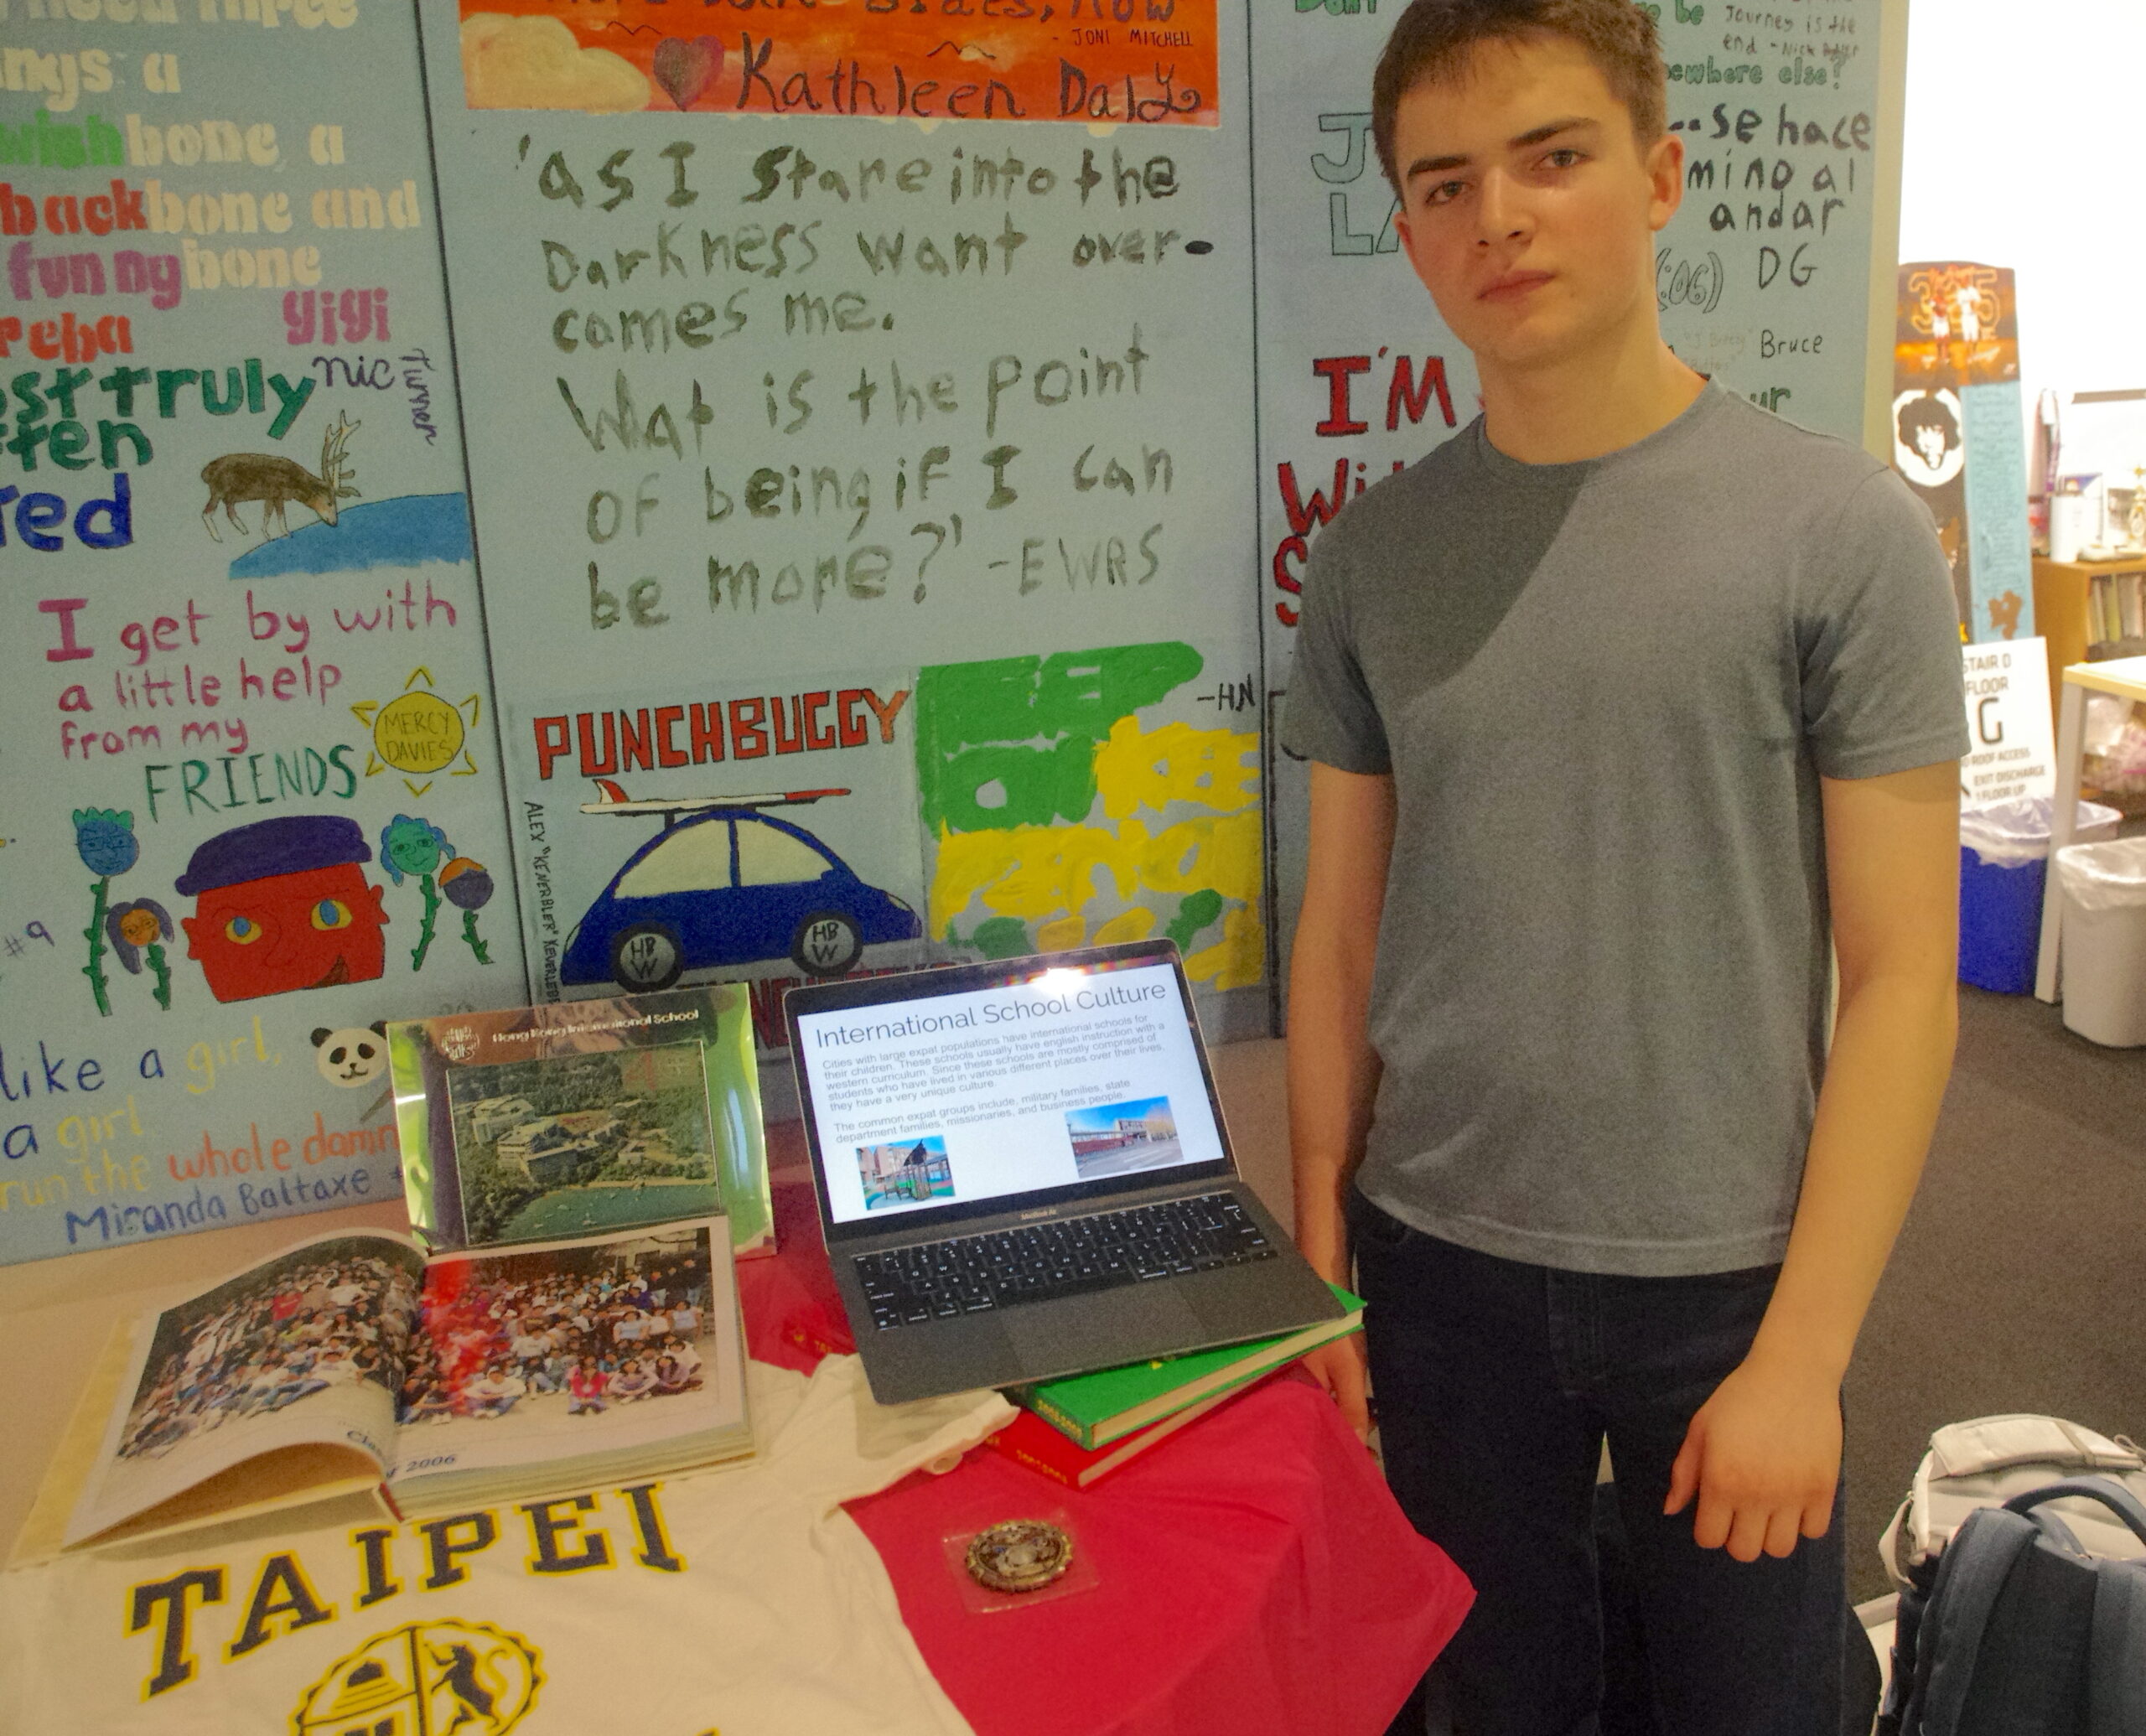 Student standing in front of his culture display